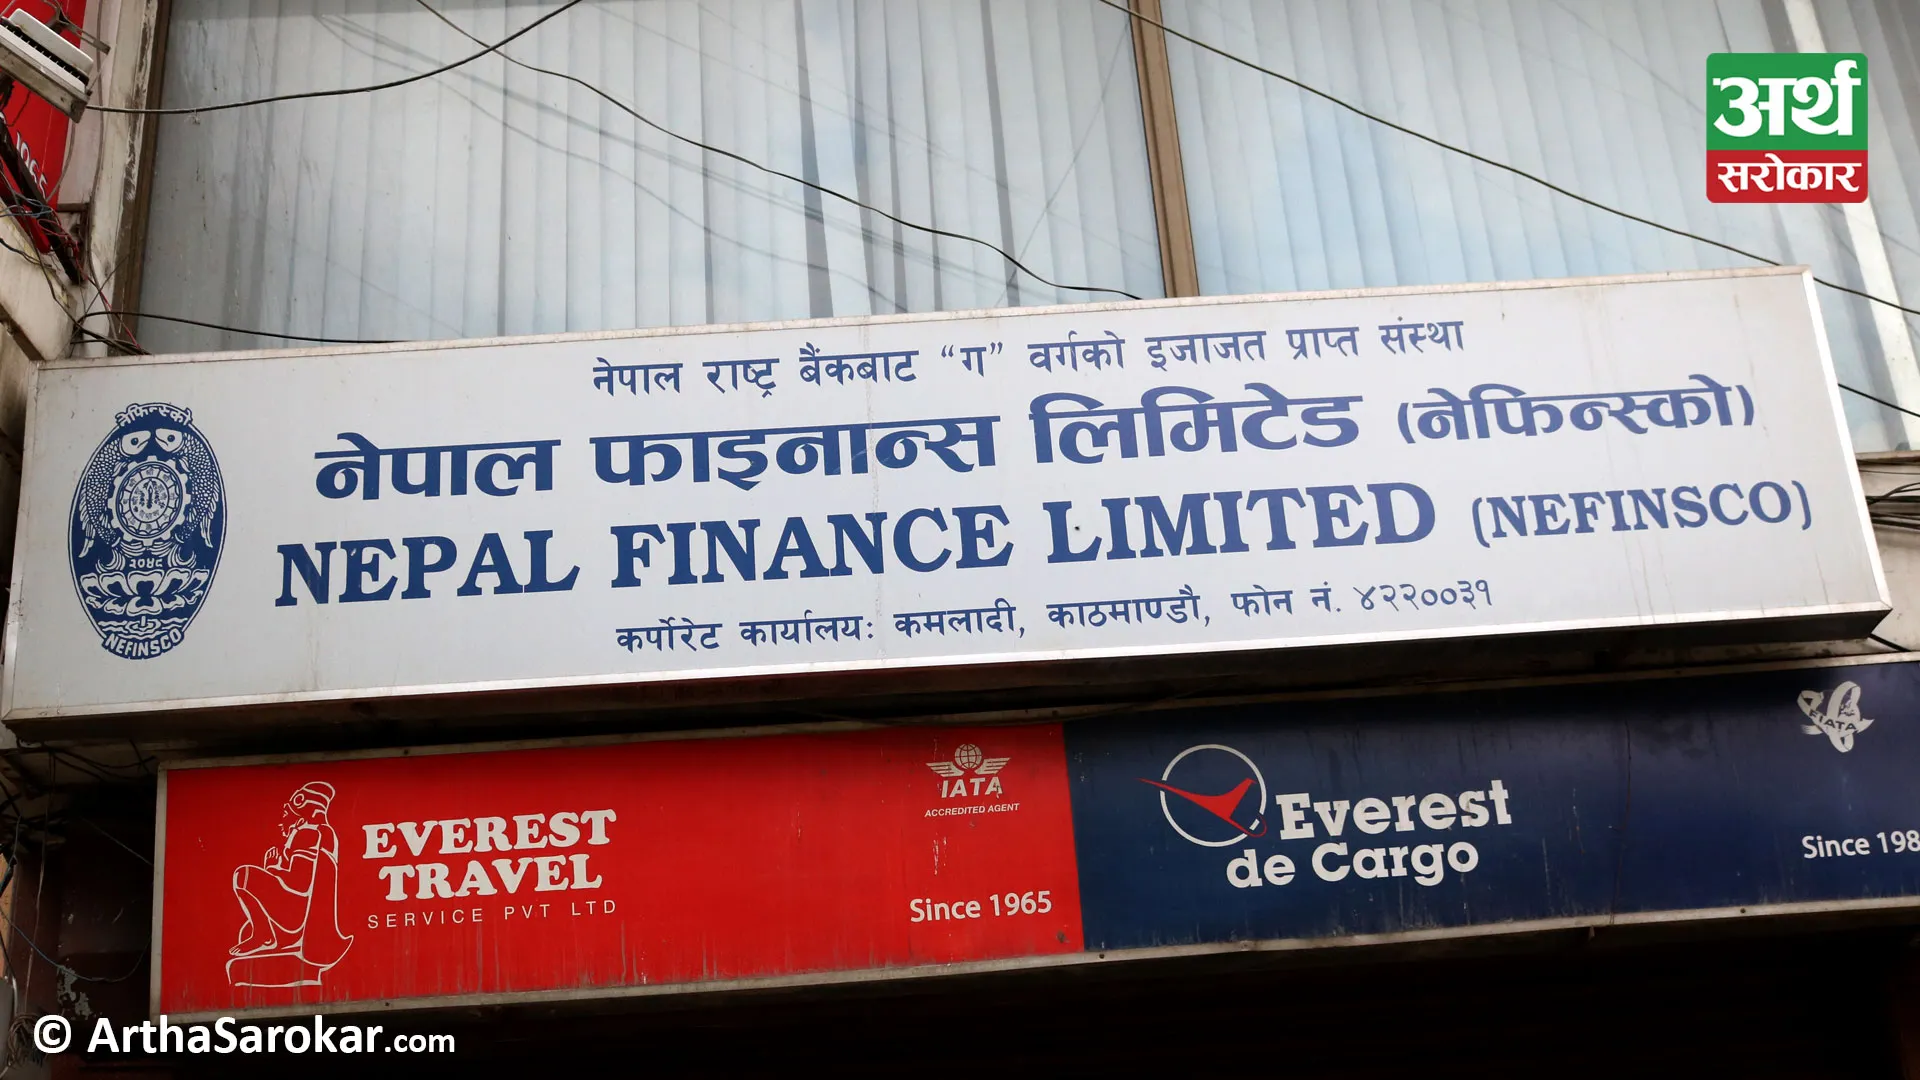 Nepal Finance Limited Faces Steep Decline in Profits: Reports 87% Drop in Third Quarter Earnings